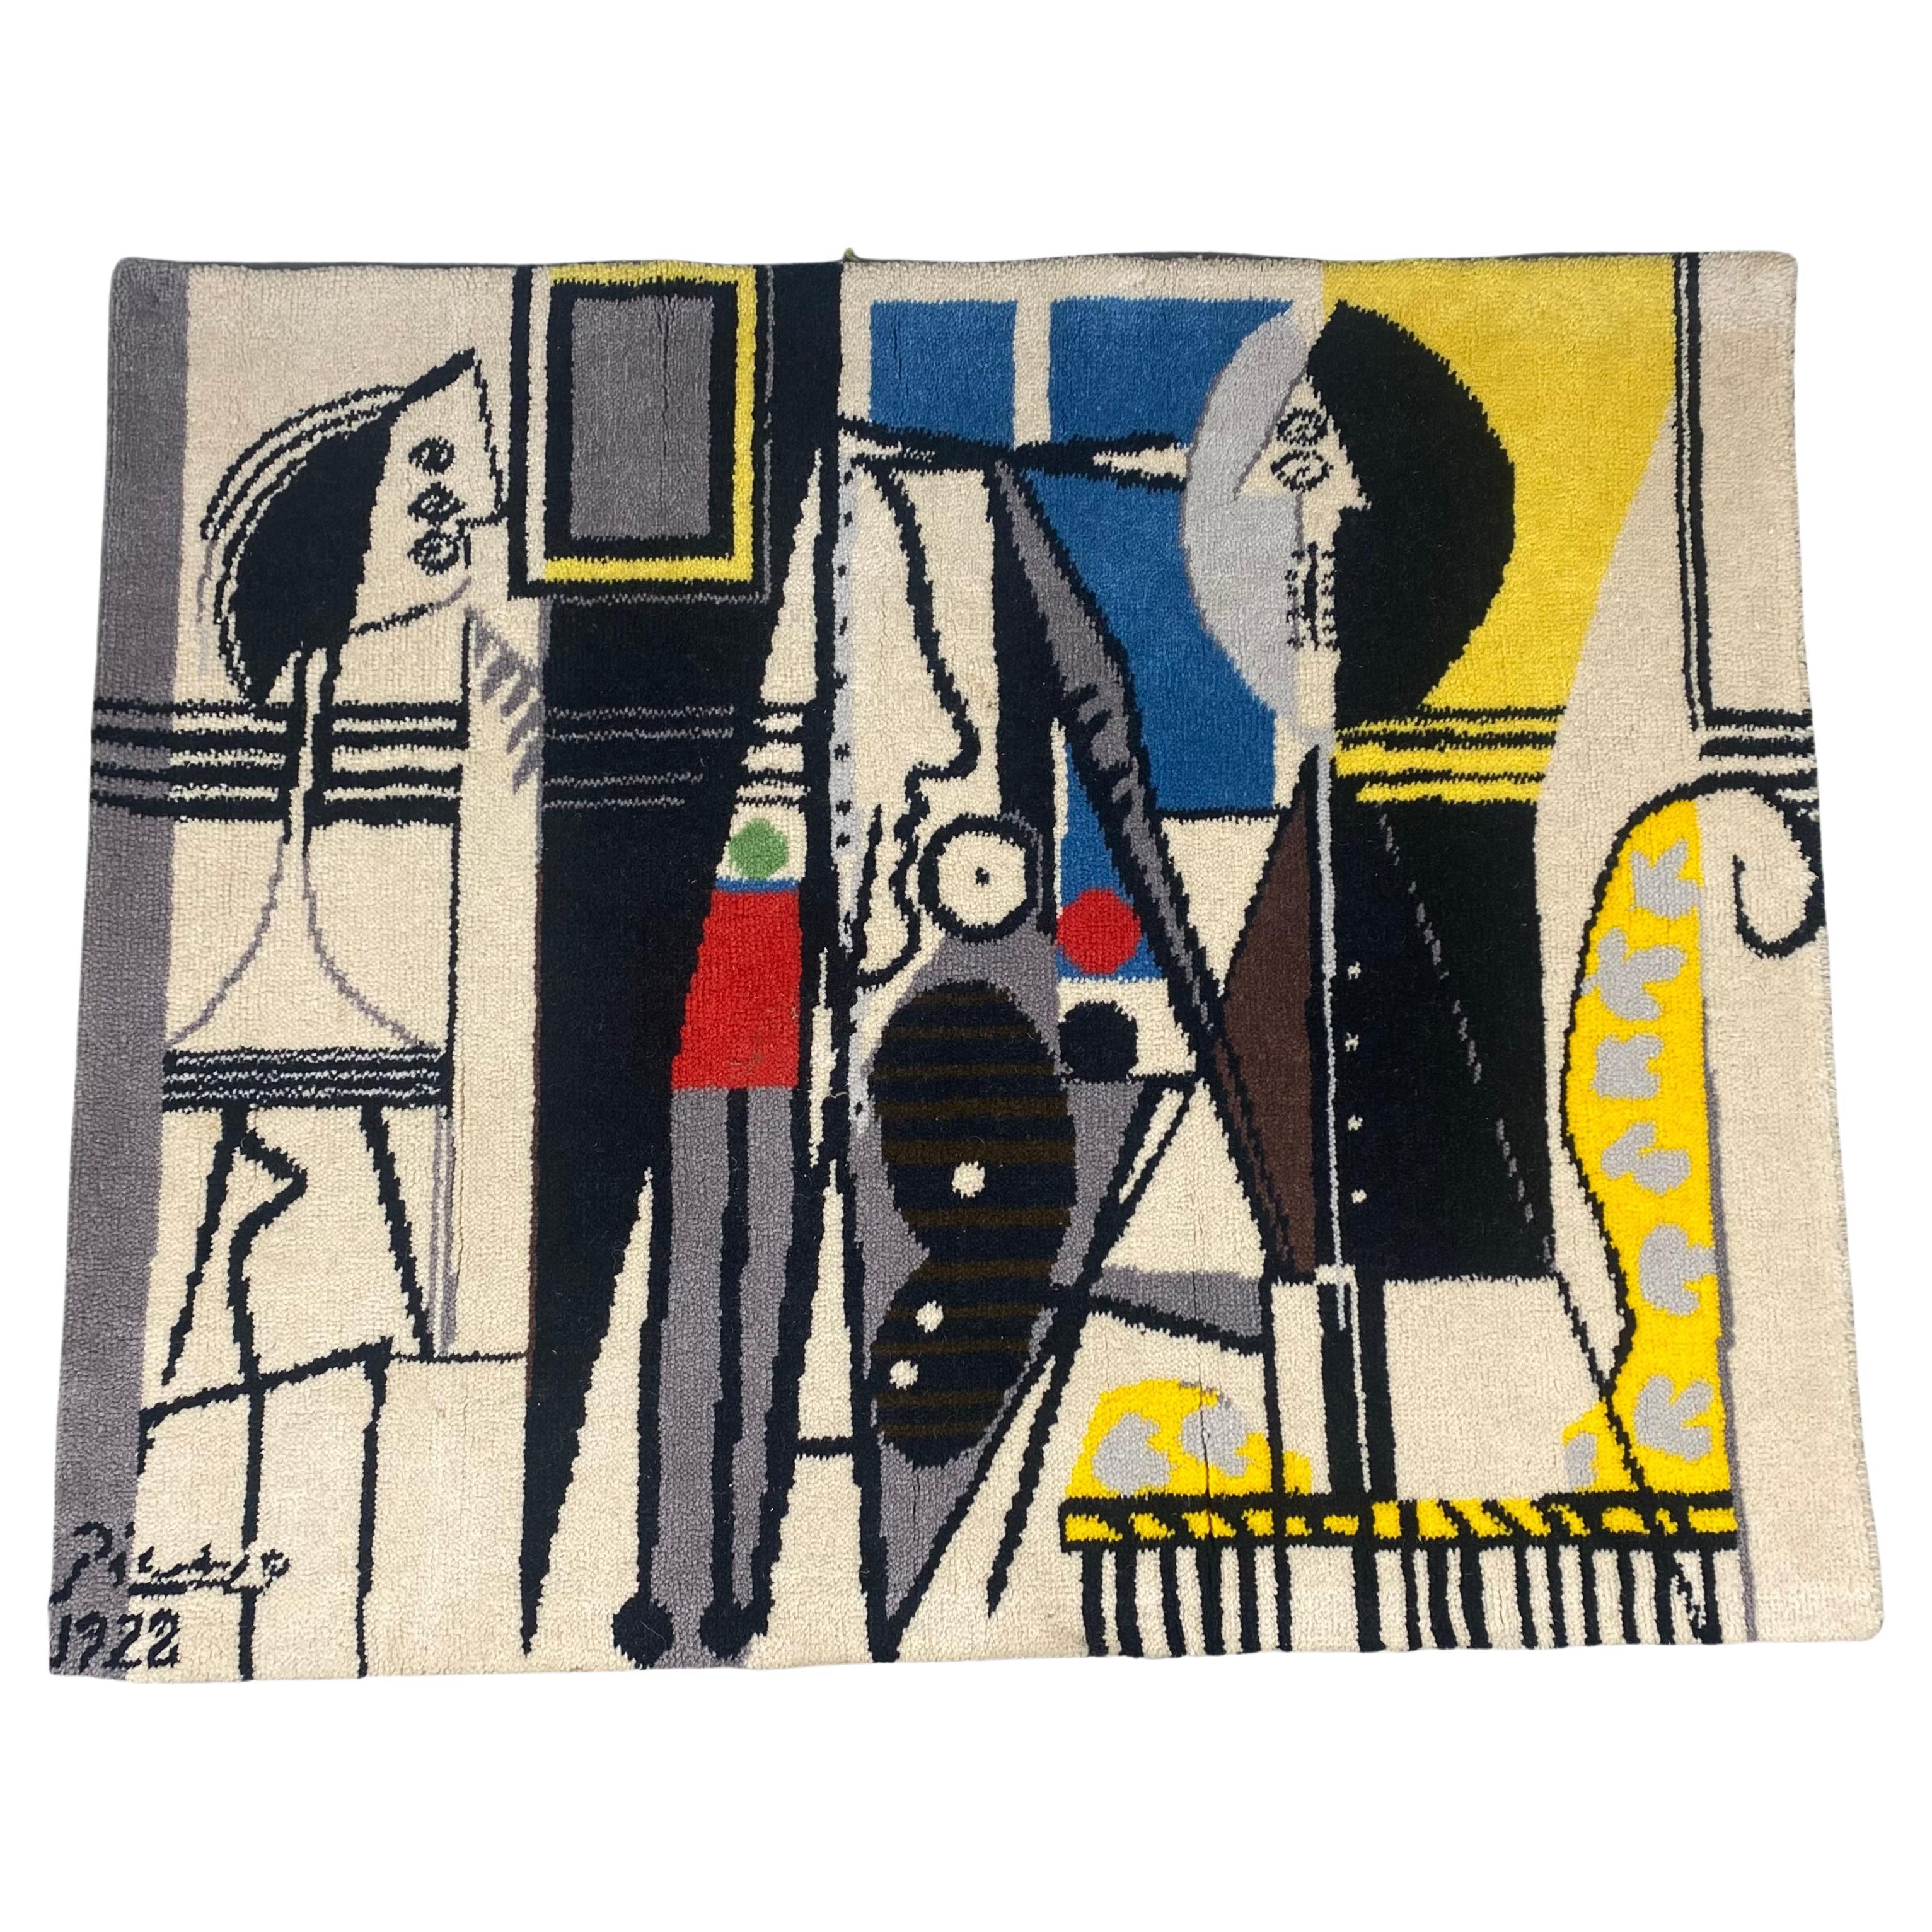 Picasso Limited Edition Artist Rug/Wall hanging by Desso, Netherlands, 1996